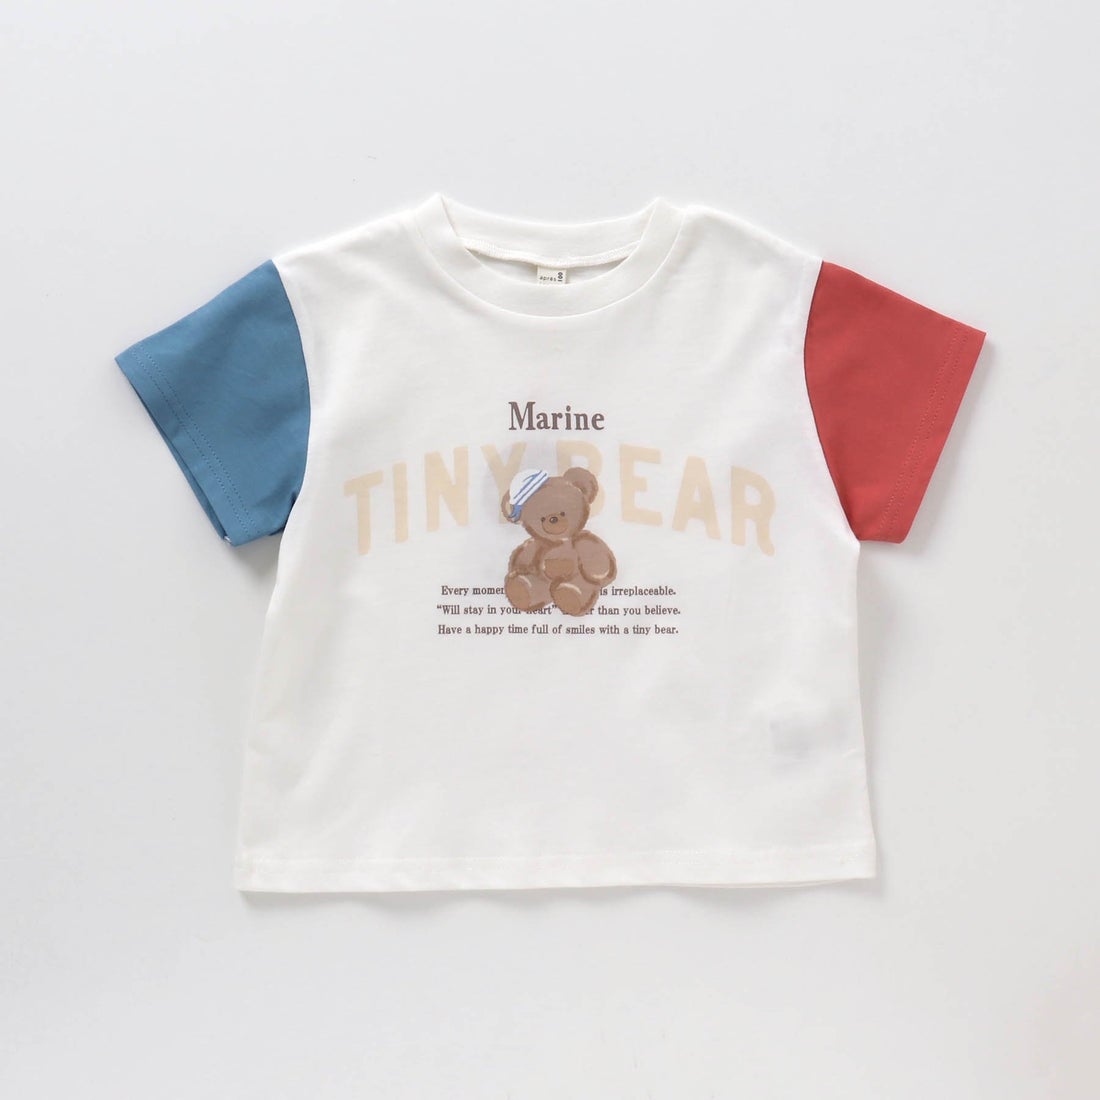 apres les cours アプレレクール　tiny bear シャツ